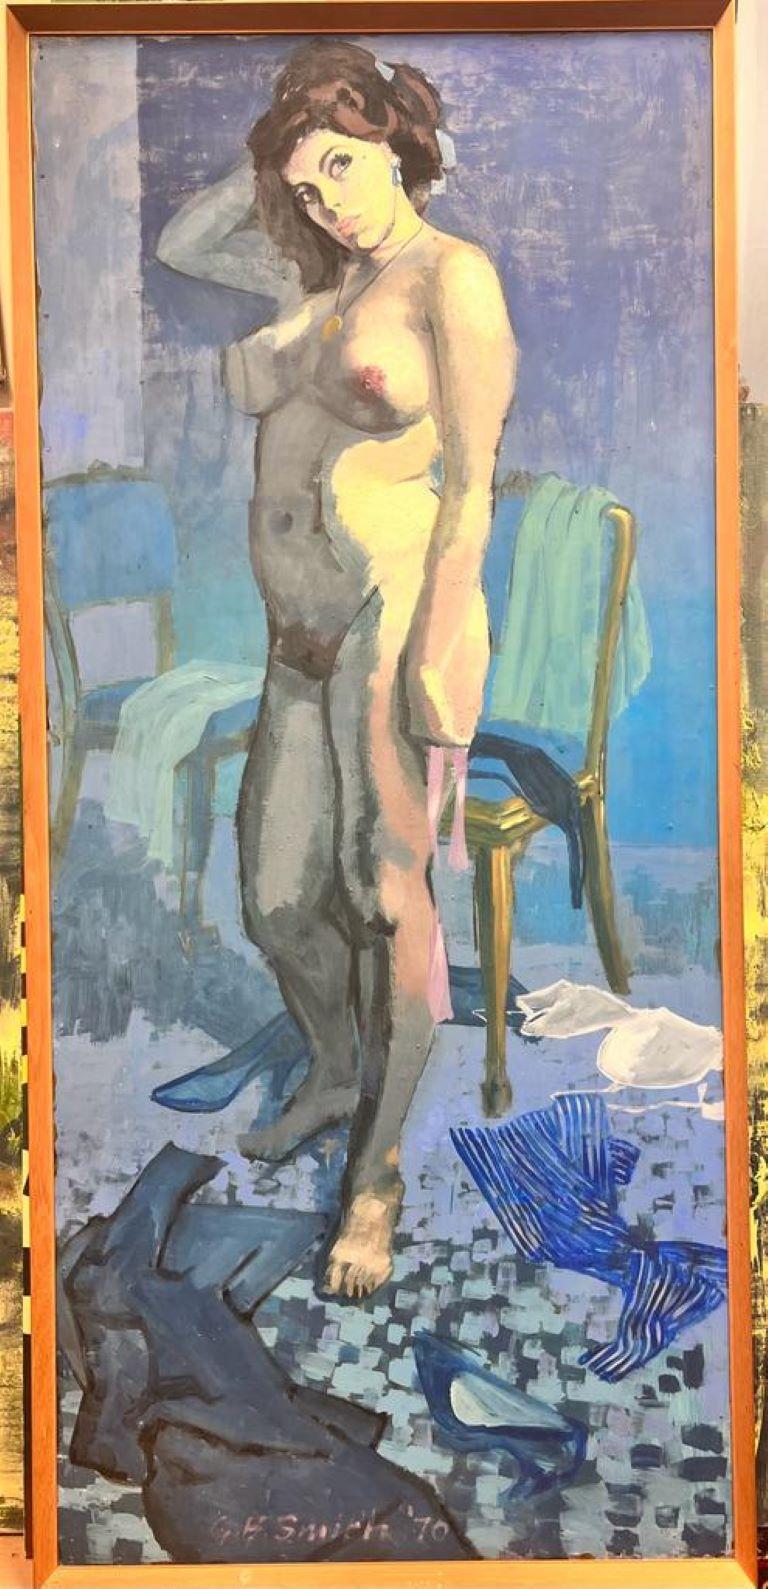 The Nude Model 
British School, signed & dated 1970
oil painting on board, framed
framed: 58 x 37 inches
board: 52 x 32 inches
provenance: private collection, England
condition: very good and sound condition , a very few minor surface marks/ scuffs.